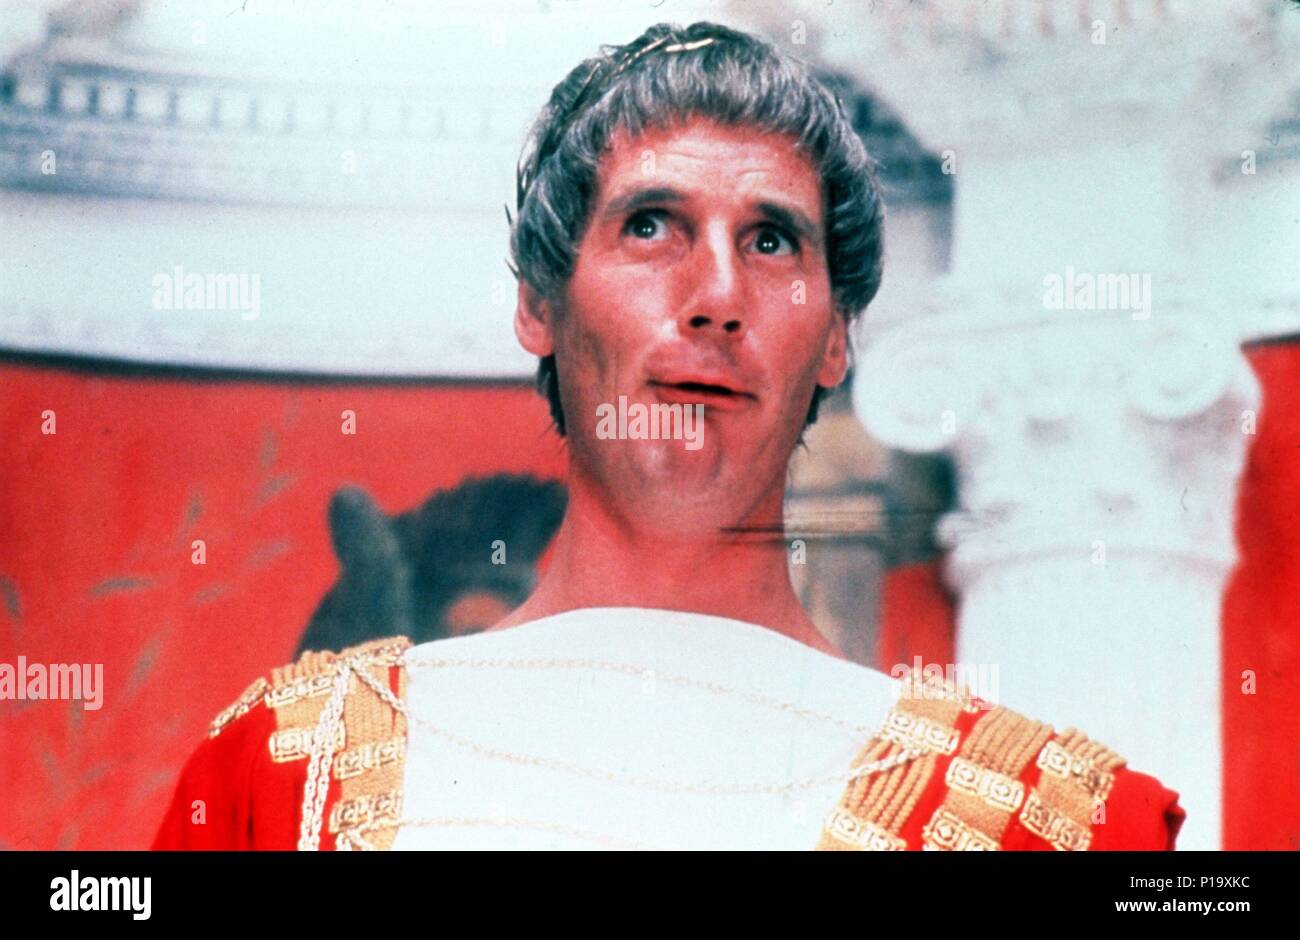 Life Of Brian 1979 Stock Photos & Life Of Brian 1979 Stock Images - Alamy